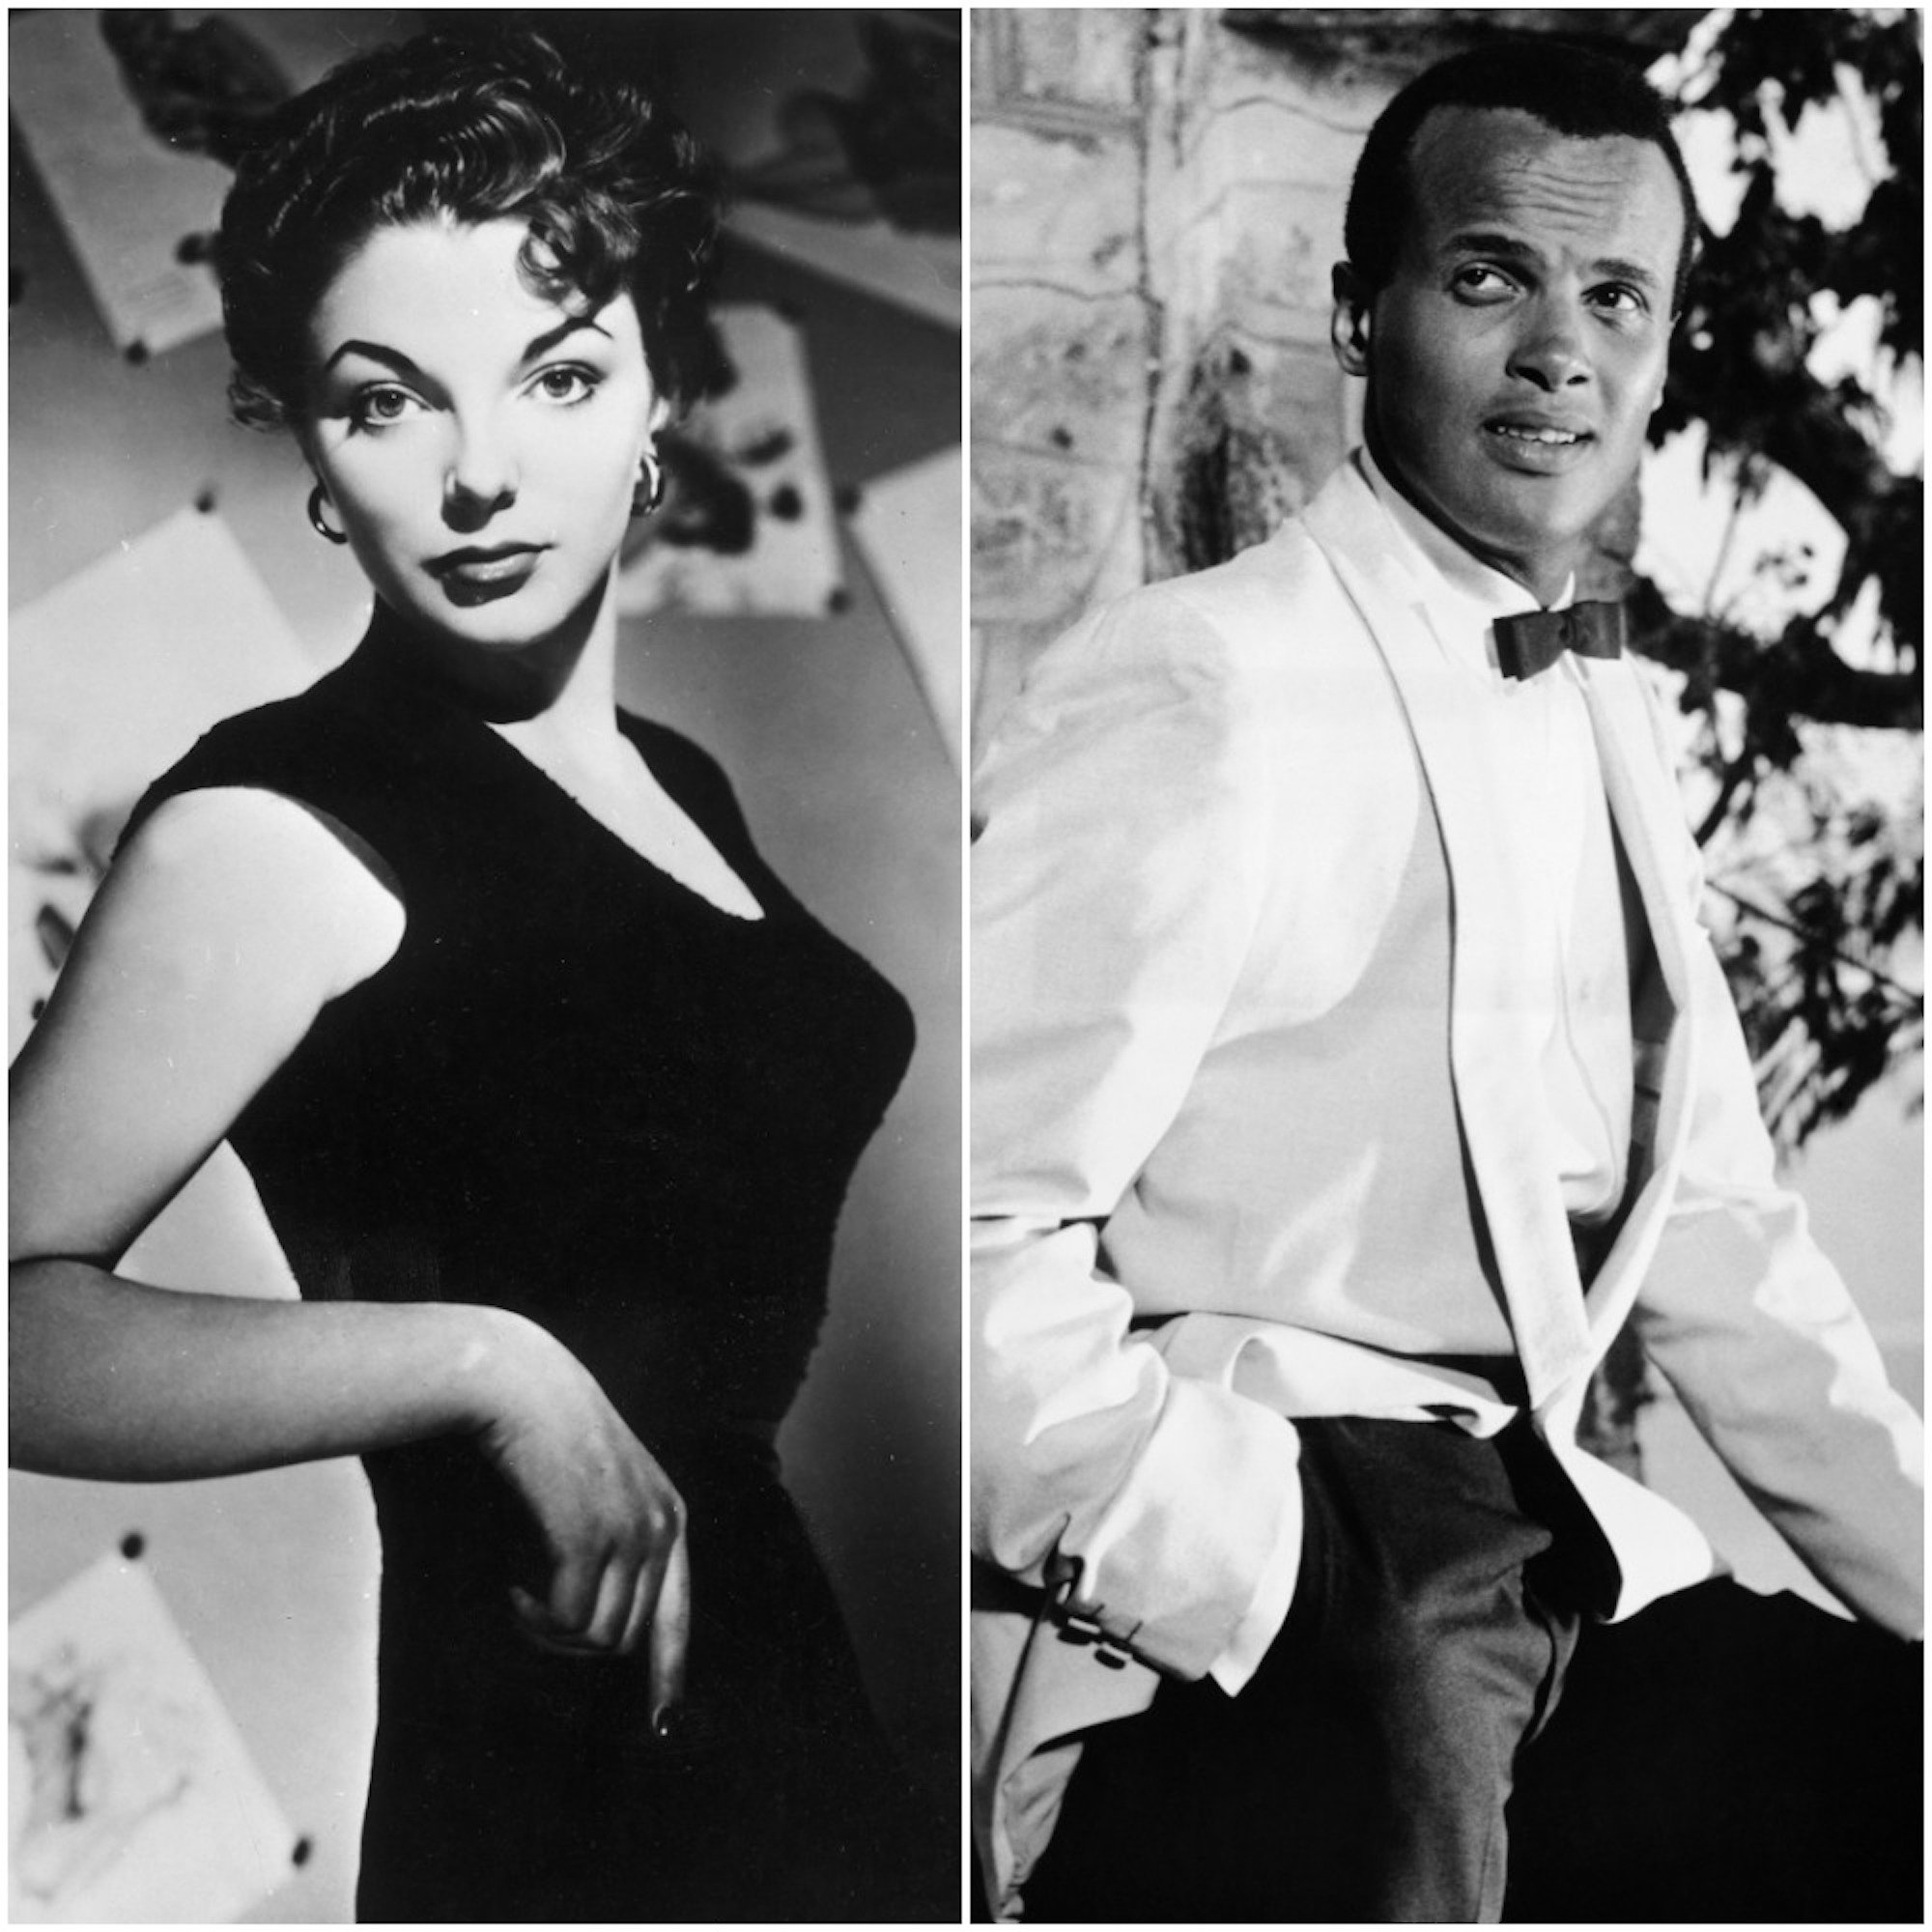 Joan Collins and Harry Belafonte